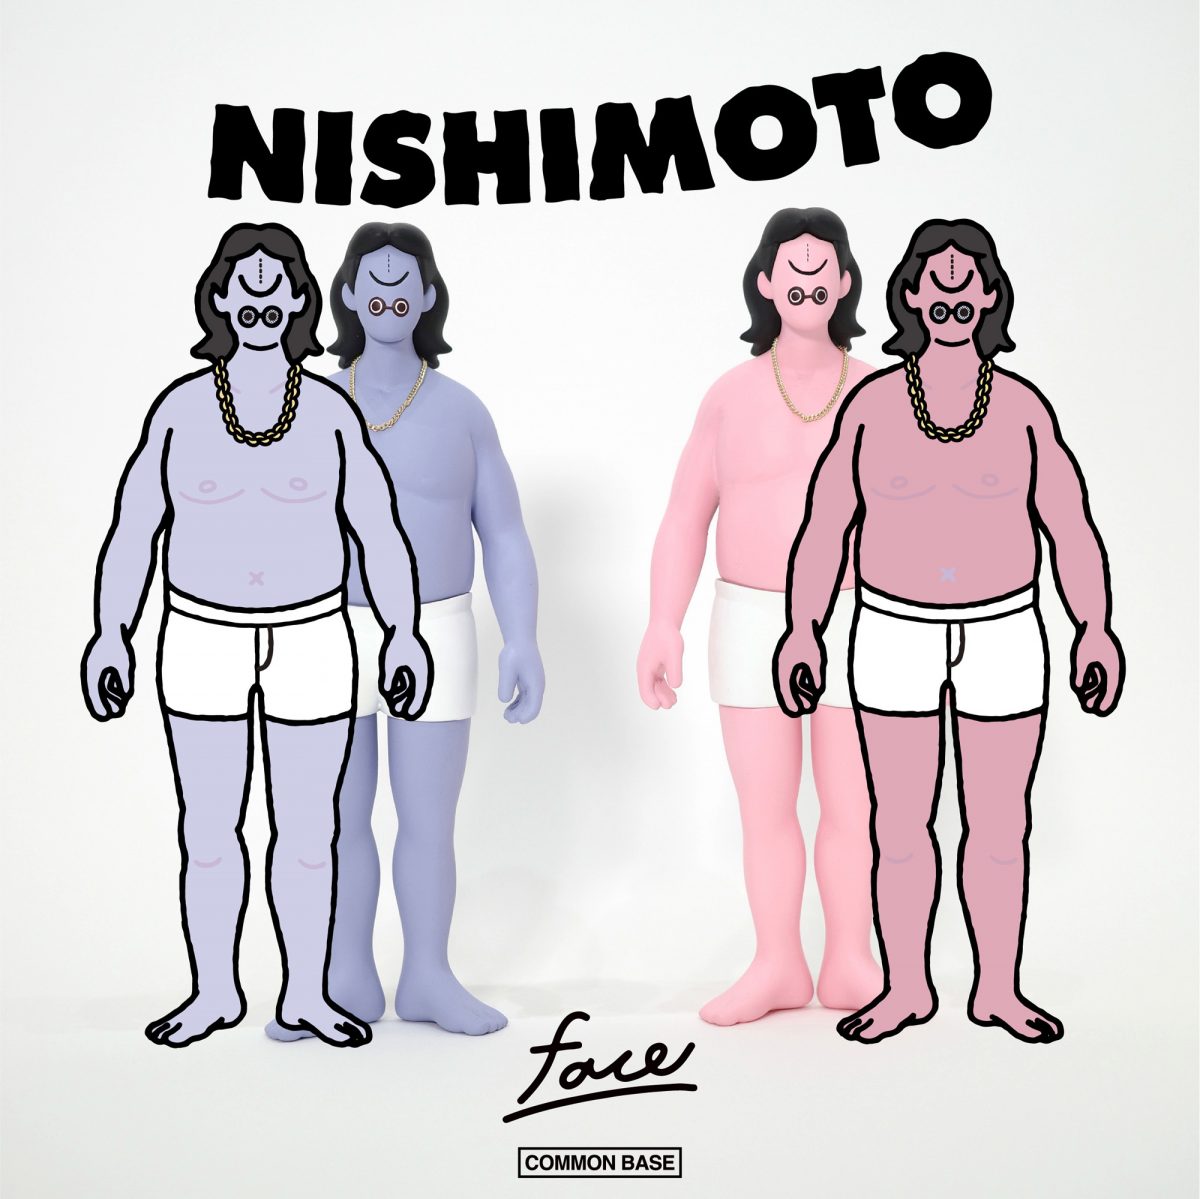 NISHIMOTO IS THE MOUTH × face Figure